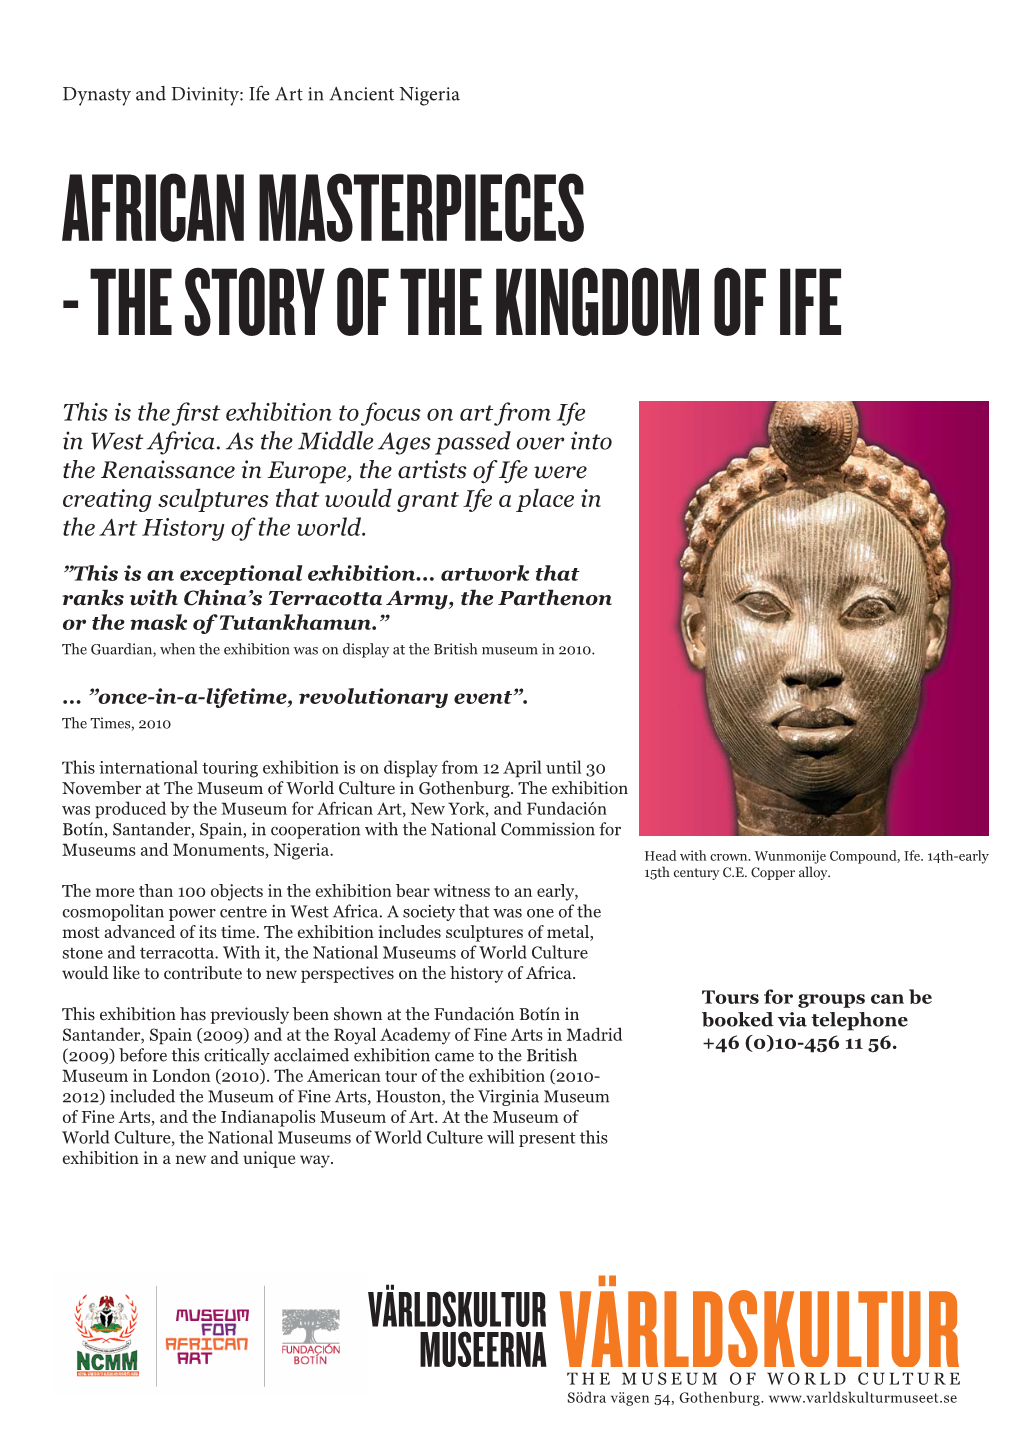 African Masterpieces - the Story of the Kingdom of Ife